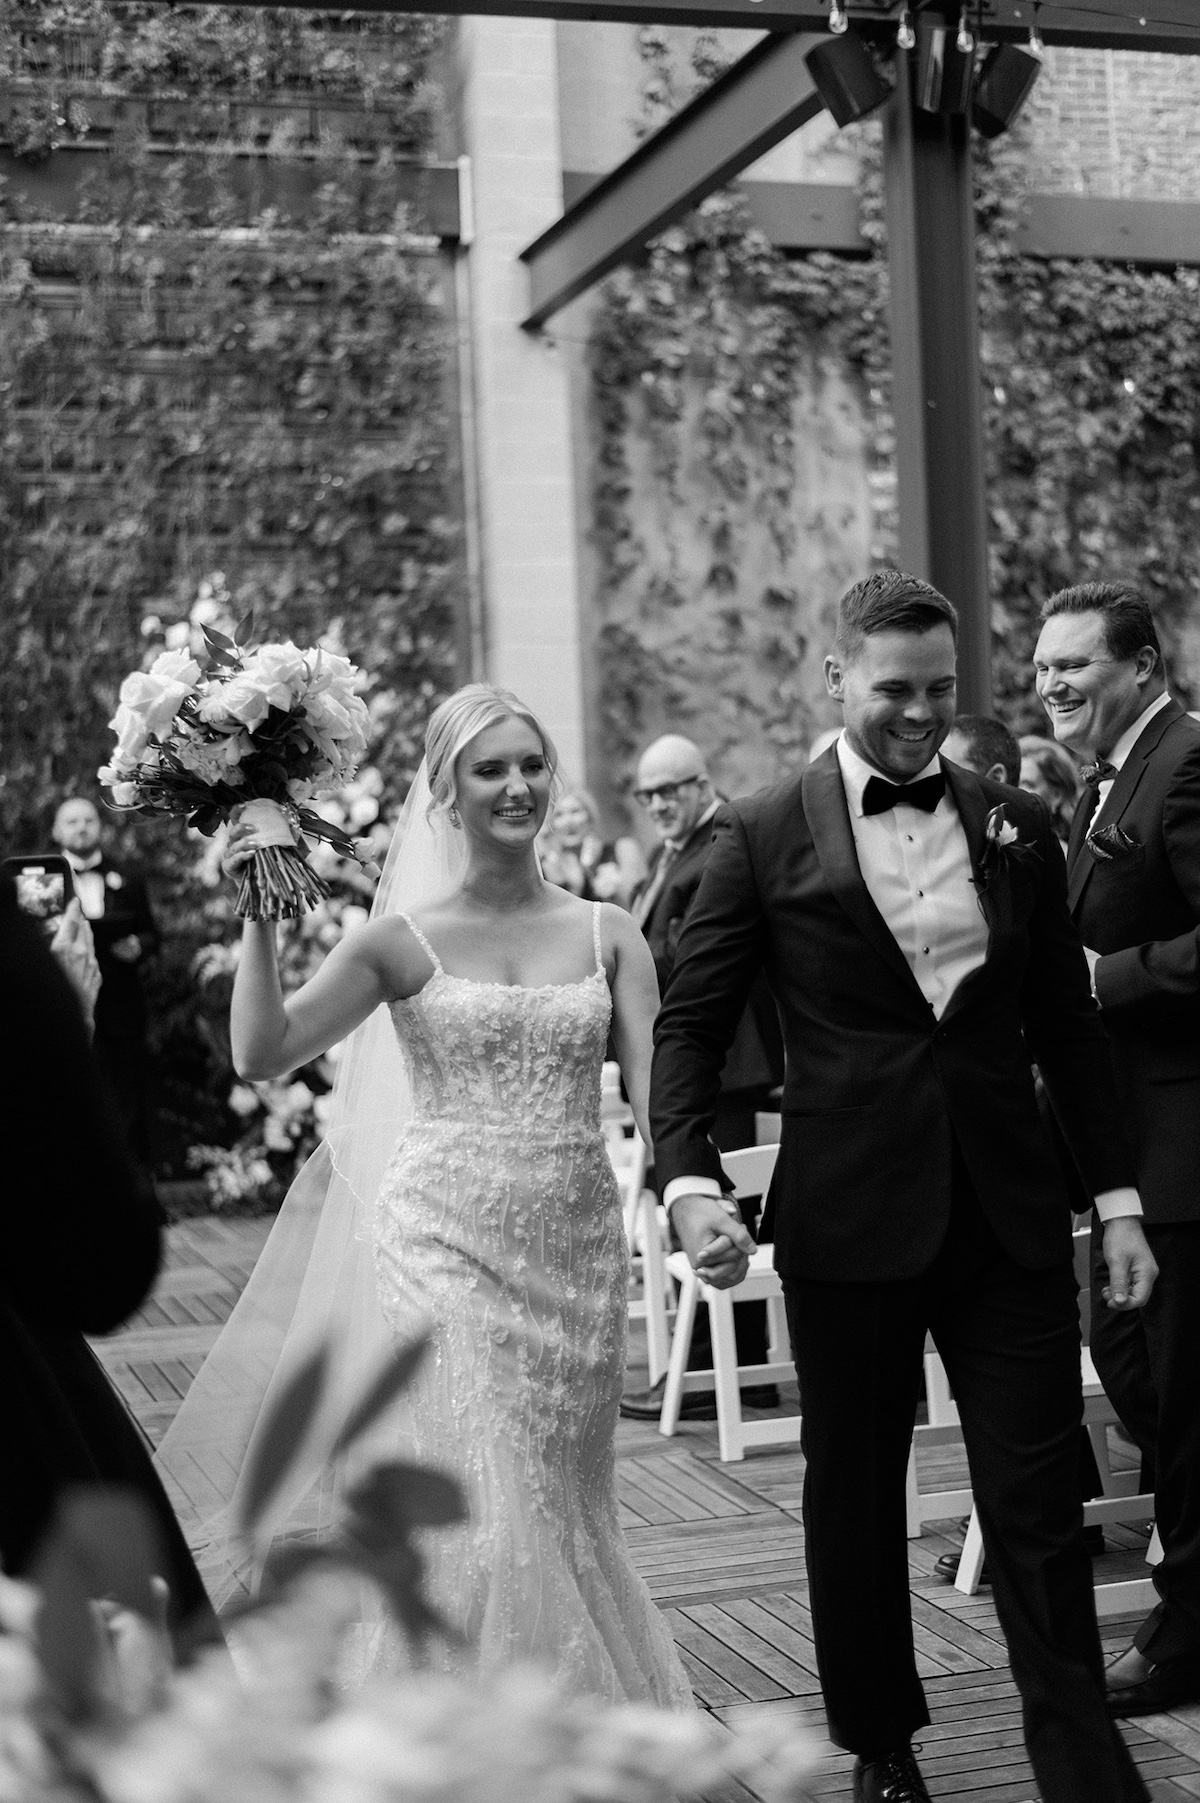 Captivating editorial moment of the bride during the recessional, showcasing her excitement and high-end celebration.